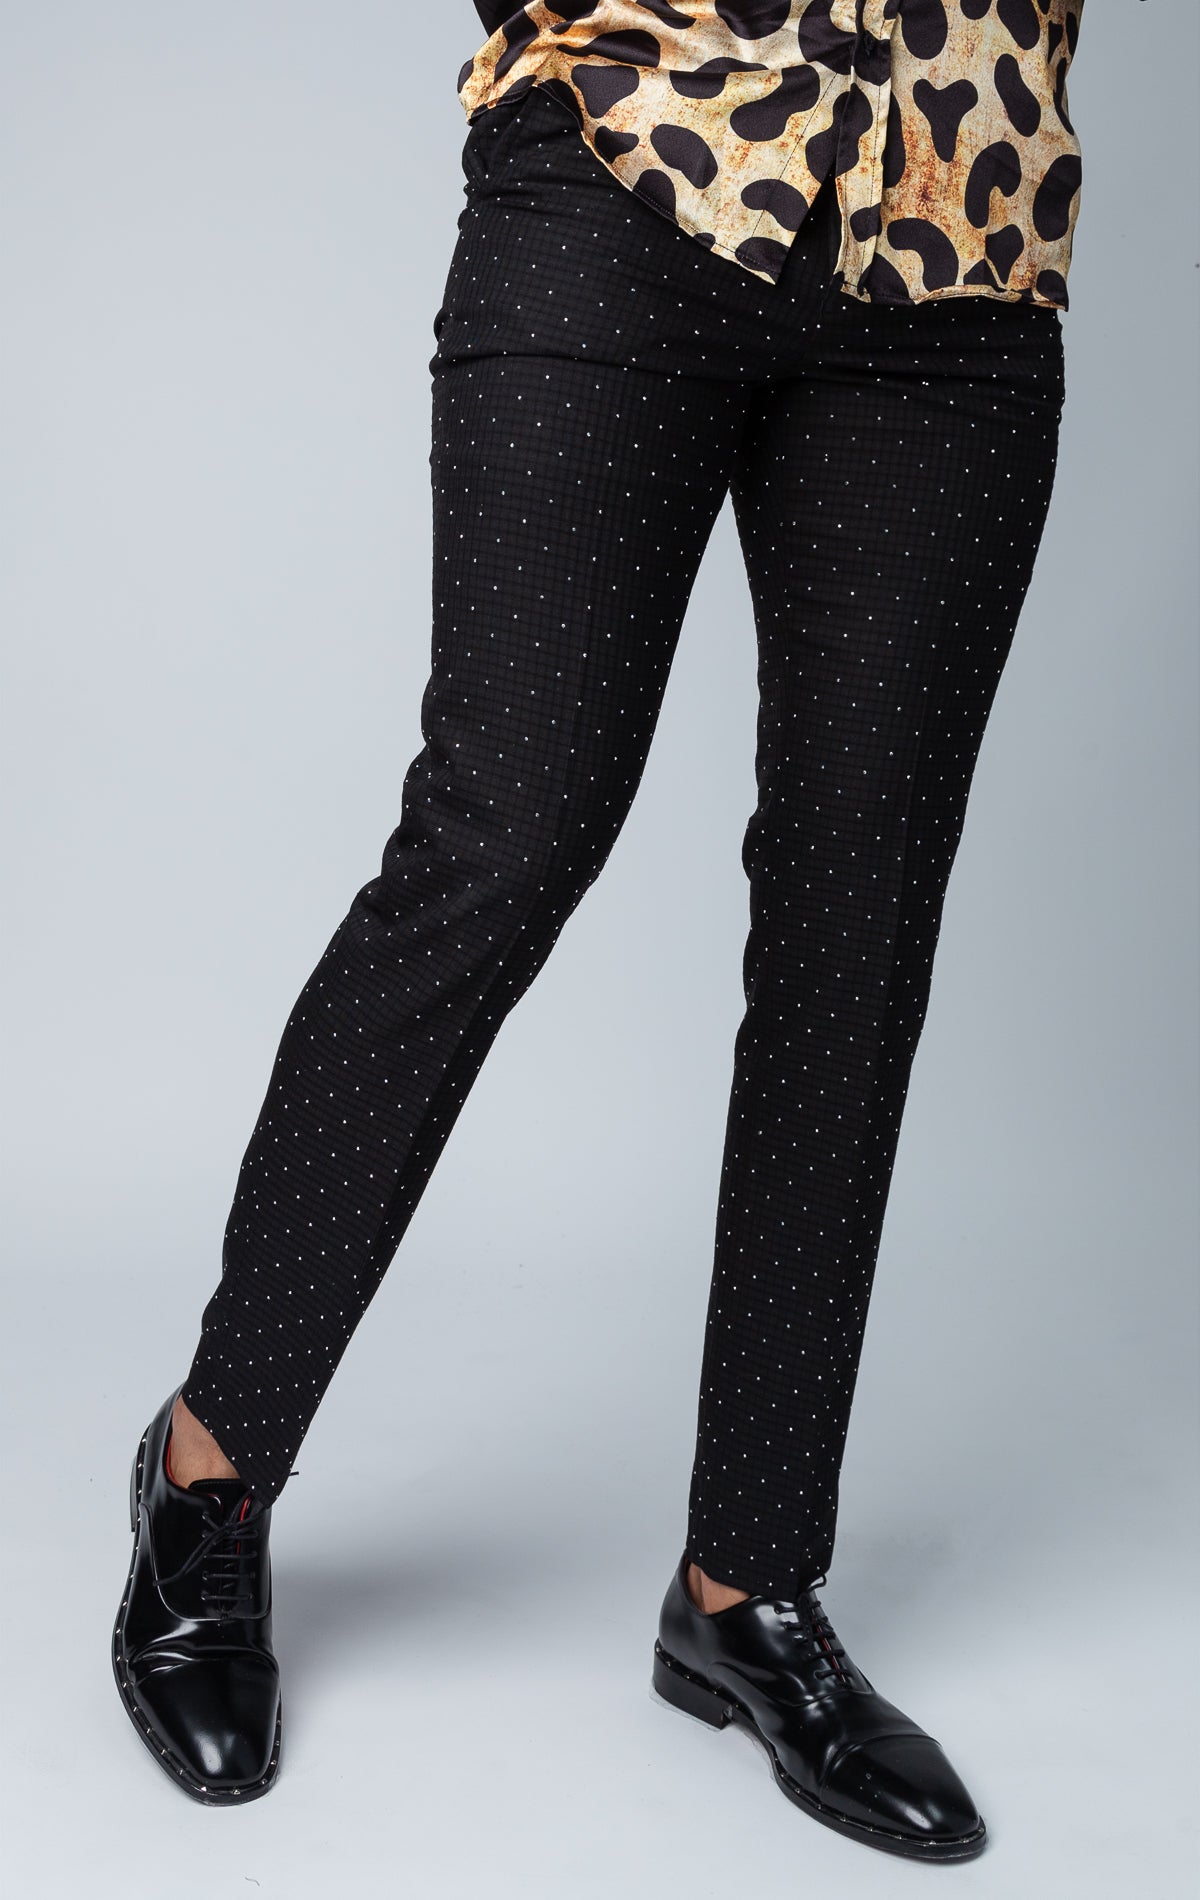 Black dress pants with crystals all over